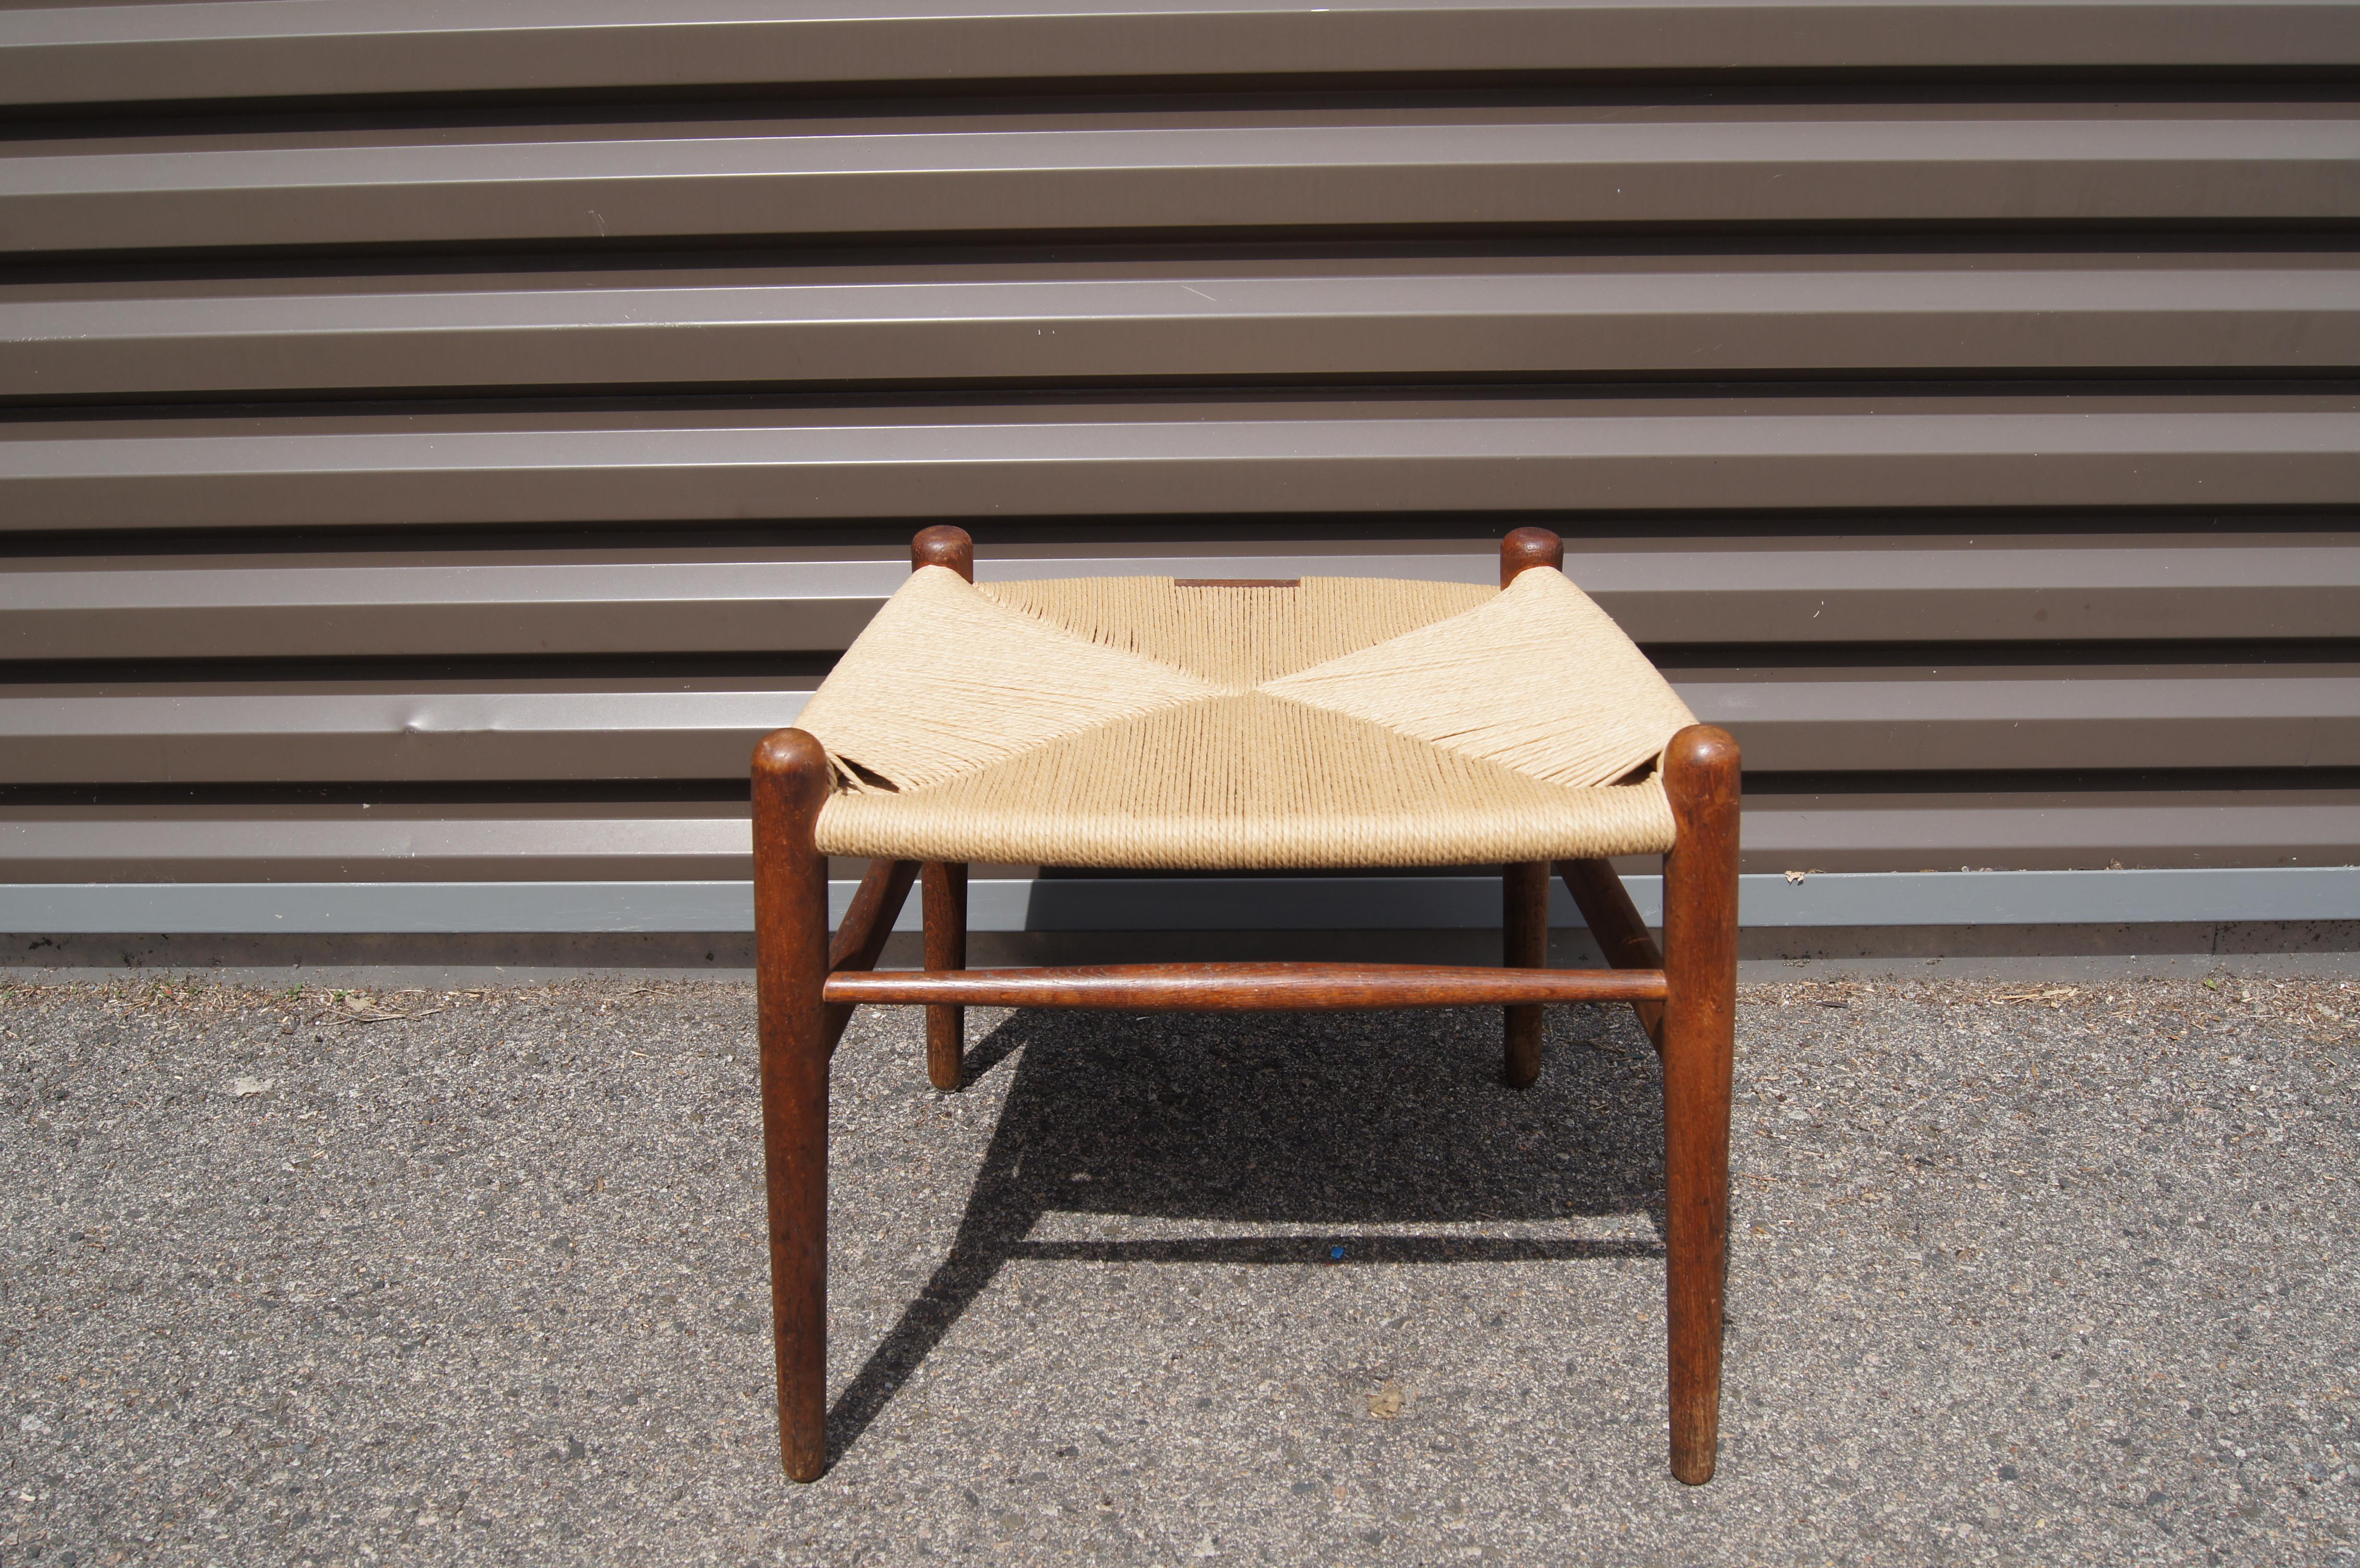 Hans Wegner designed this rarely seen ottoman to accompany his Wishbone seating for Carl Hansen. The original tapered oak frame features a papercord seat, newly wrapped.

Manufacturer's label on underside.